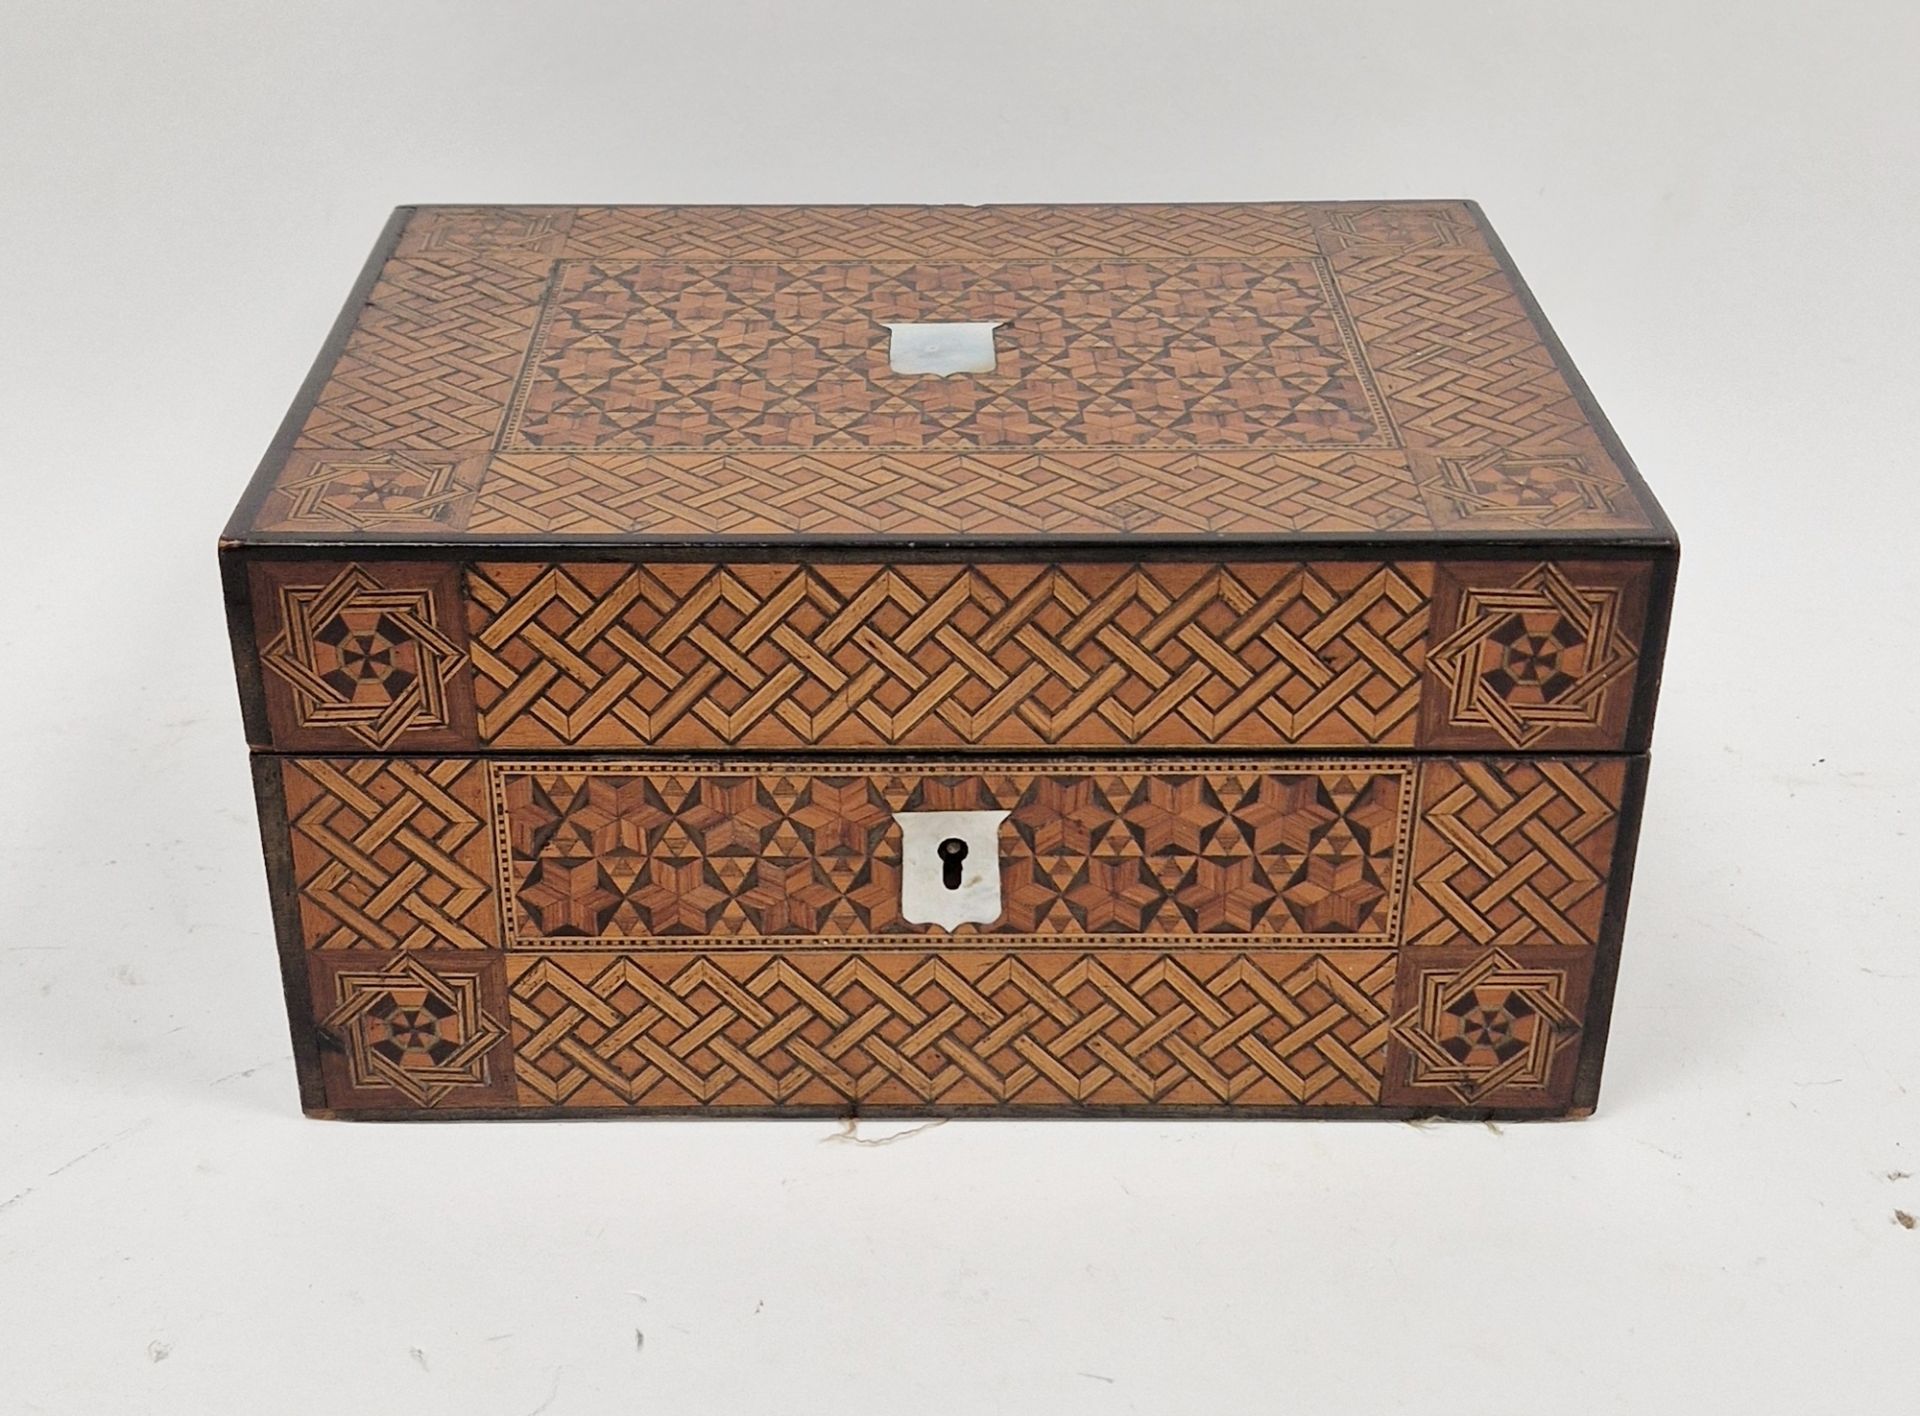 19th century Tunbridgeware box having allover parquetry inlay and two mother-of-pearl shield-